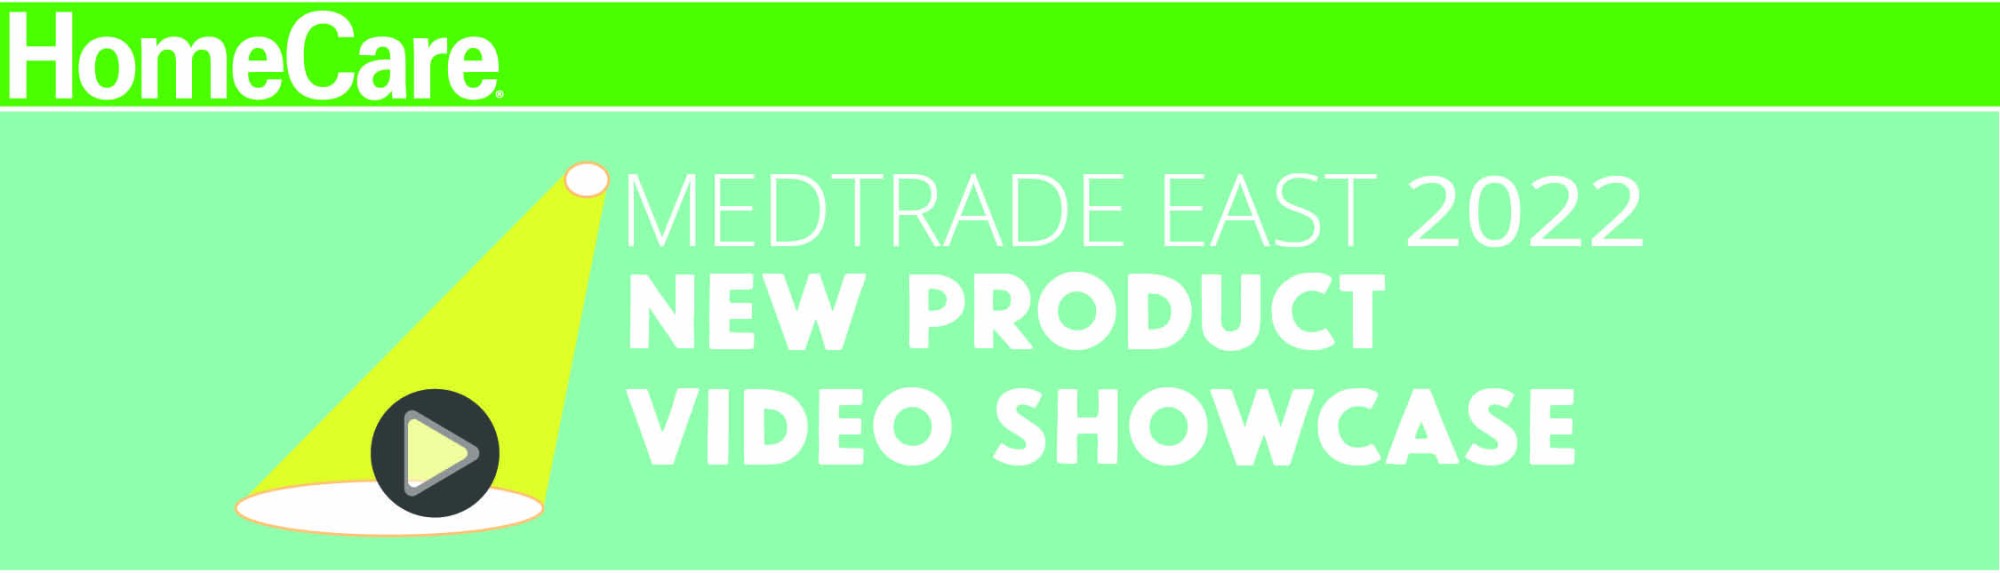 Medtrade East Video Product Showcase Form